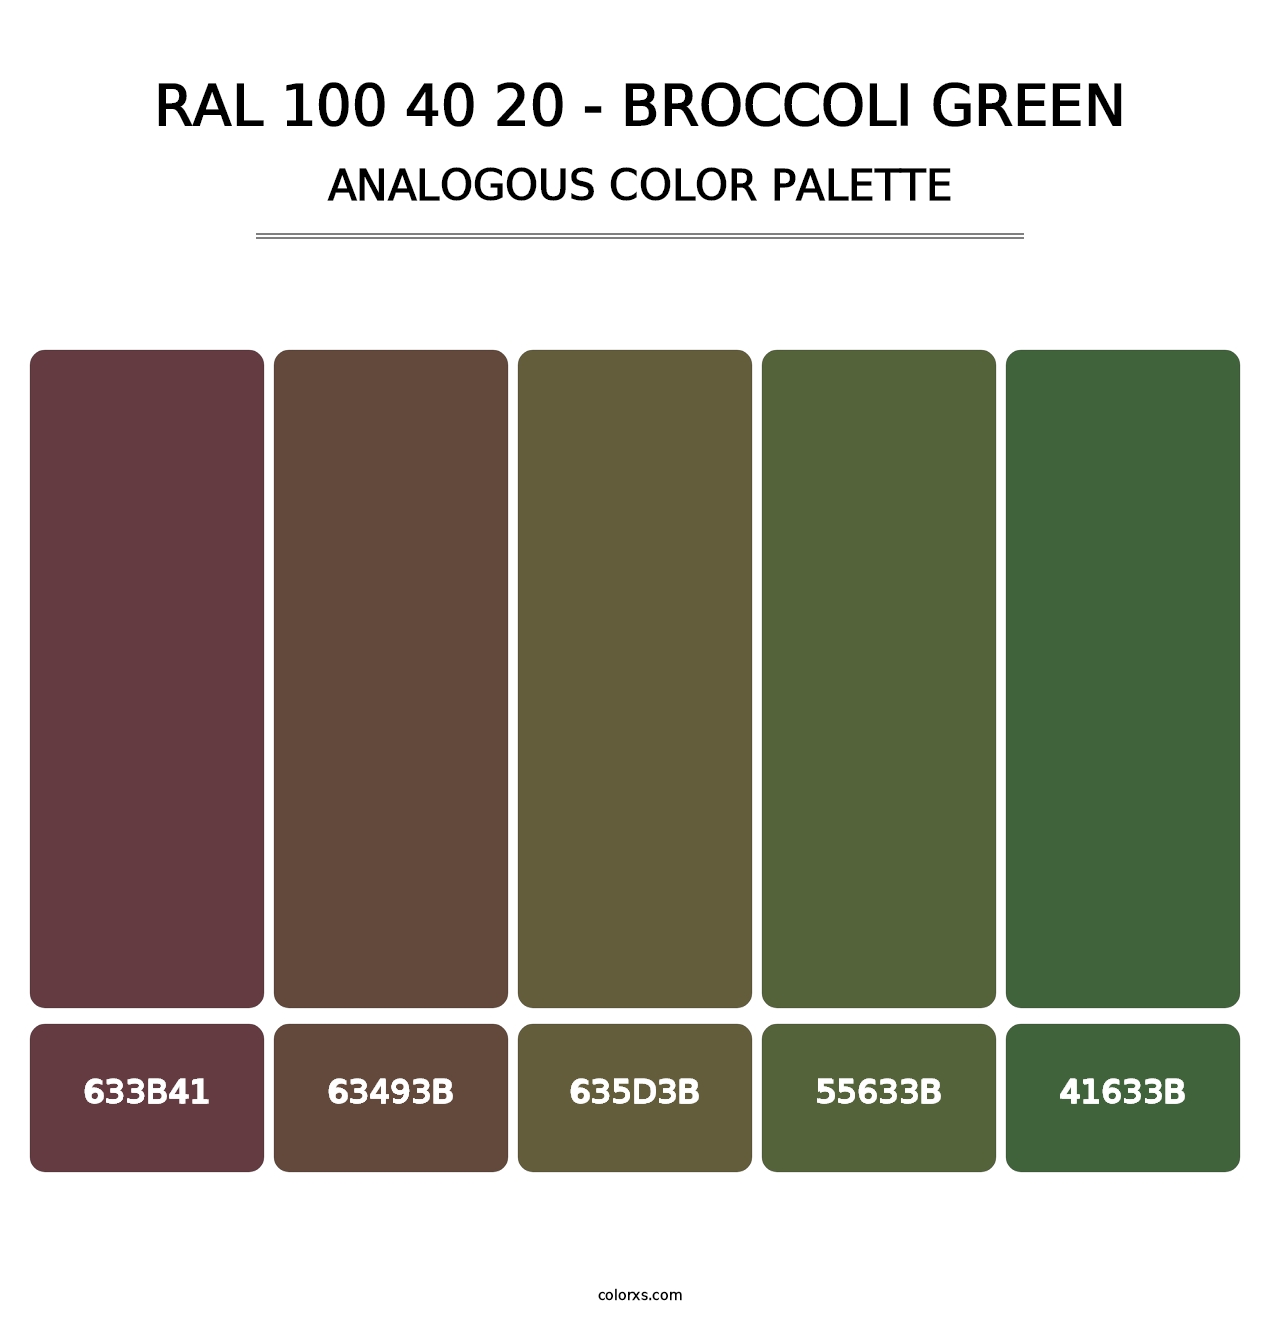 RAL 100 40 20 - Broccoli Green - Analogous Color Palette